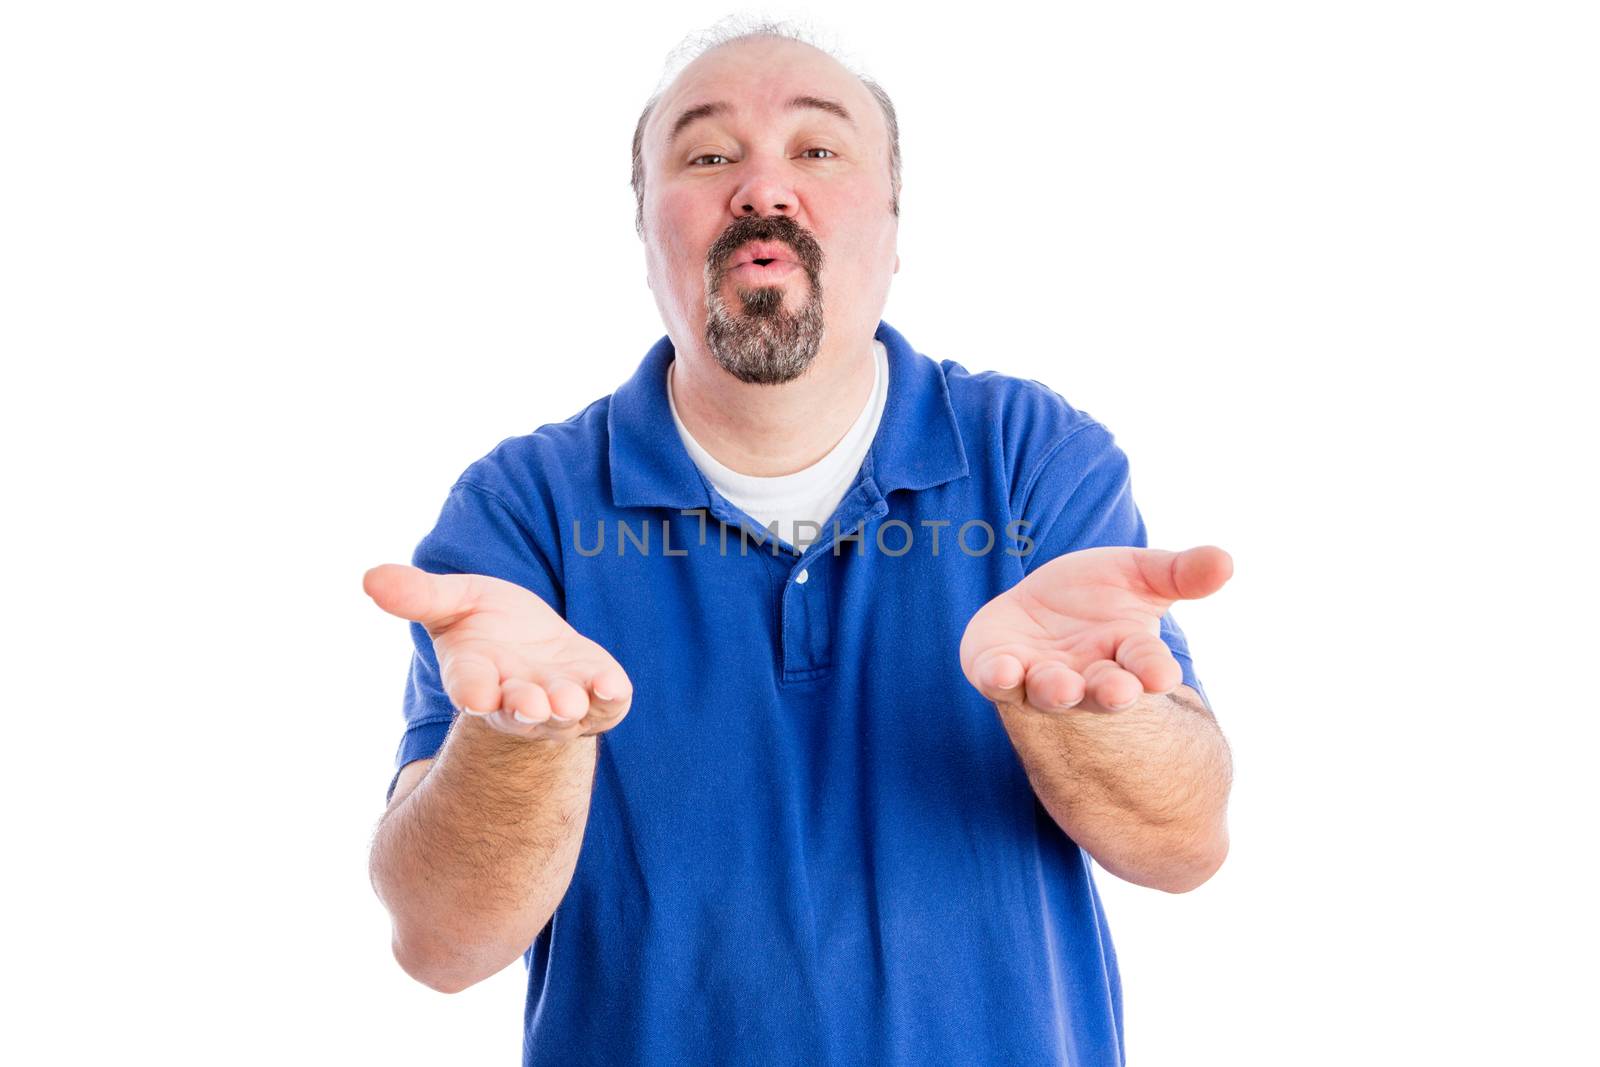 Persuasive middle-aged man with a goatee cajoling and pleading with his hands outstretched , upper body in a blue t-shirt isolated on white